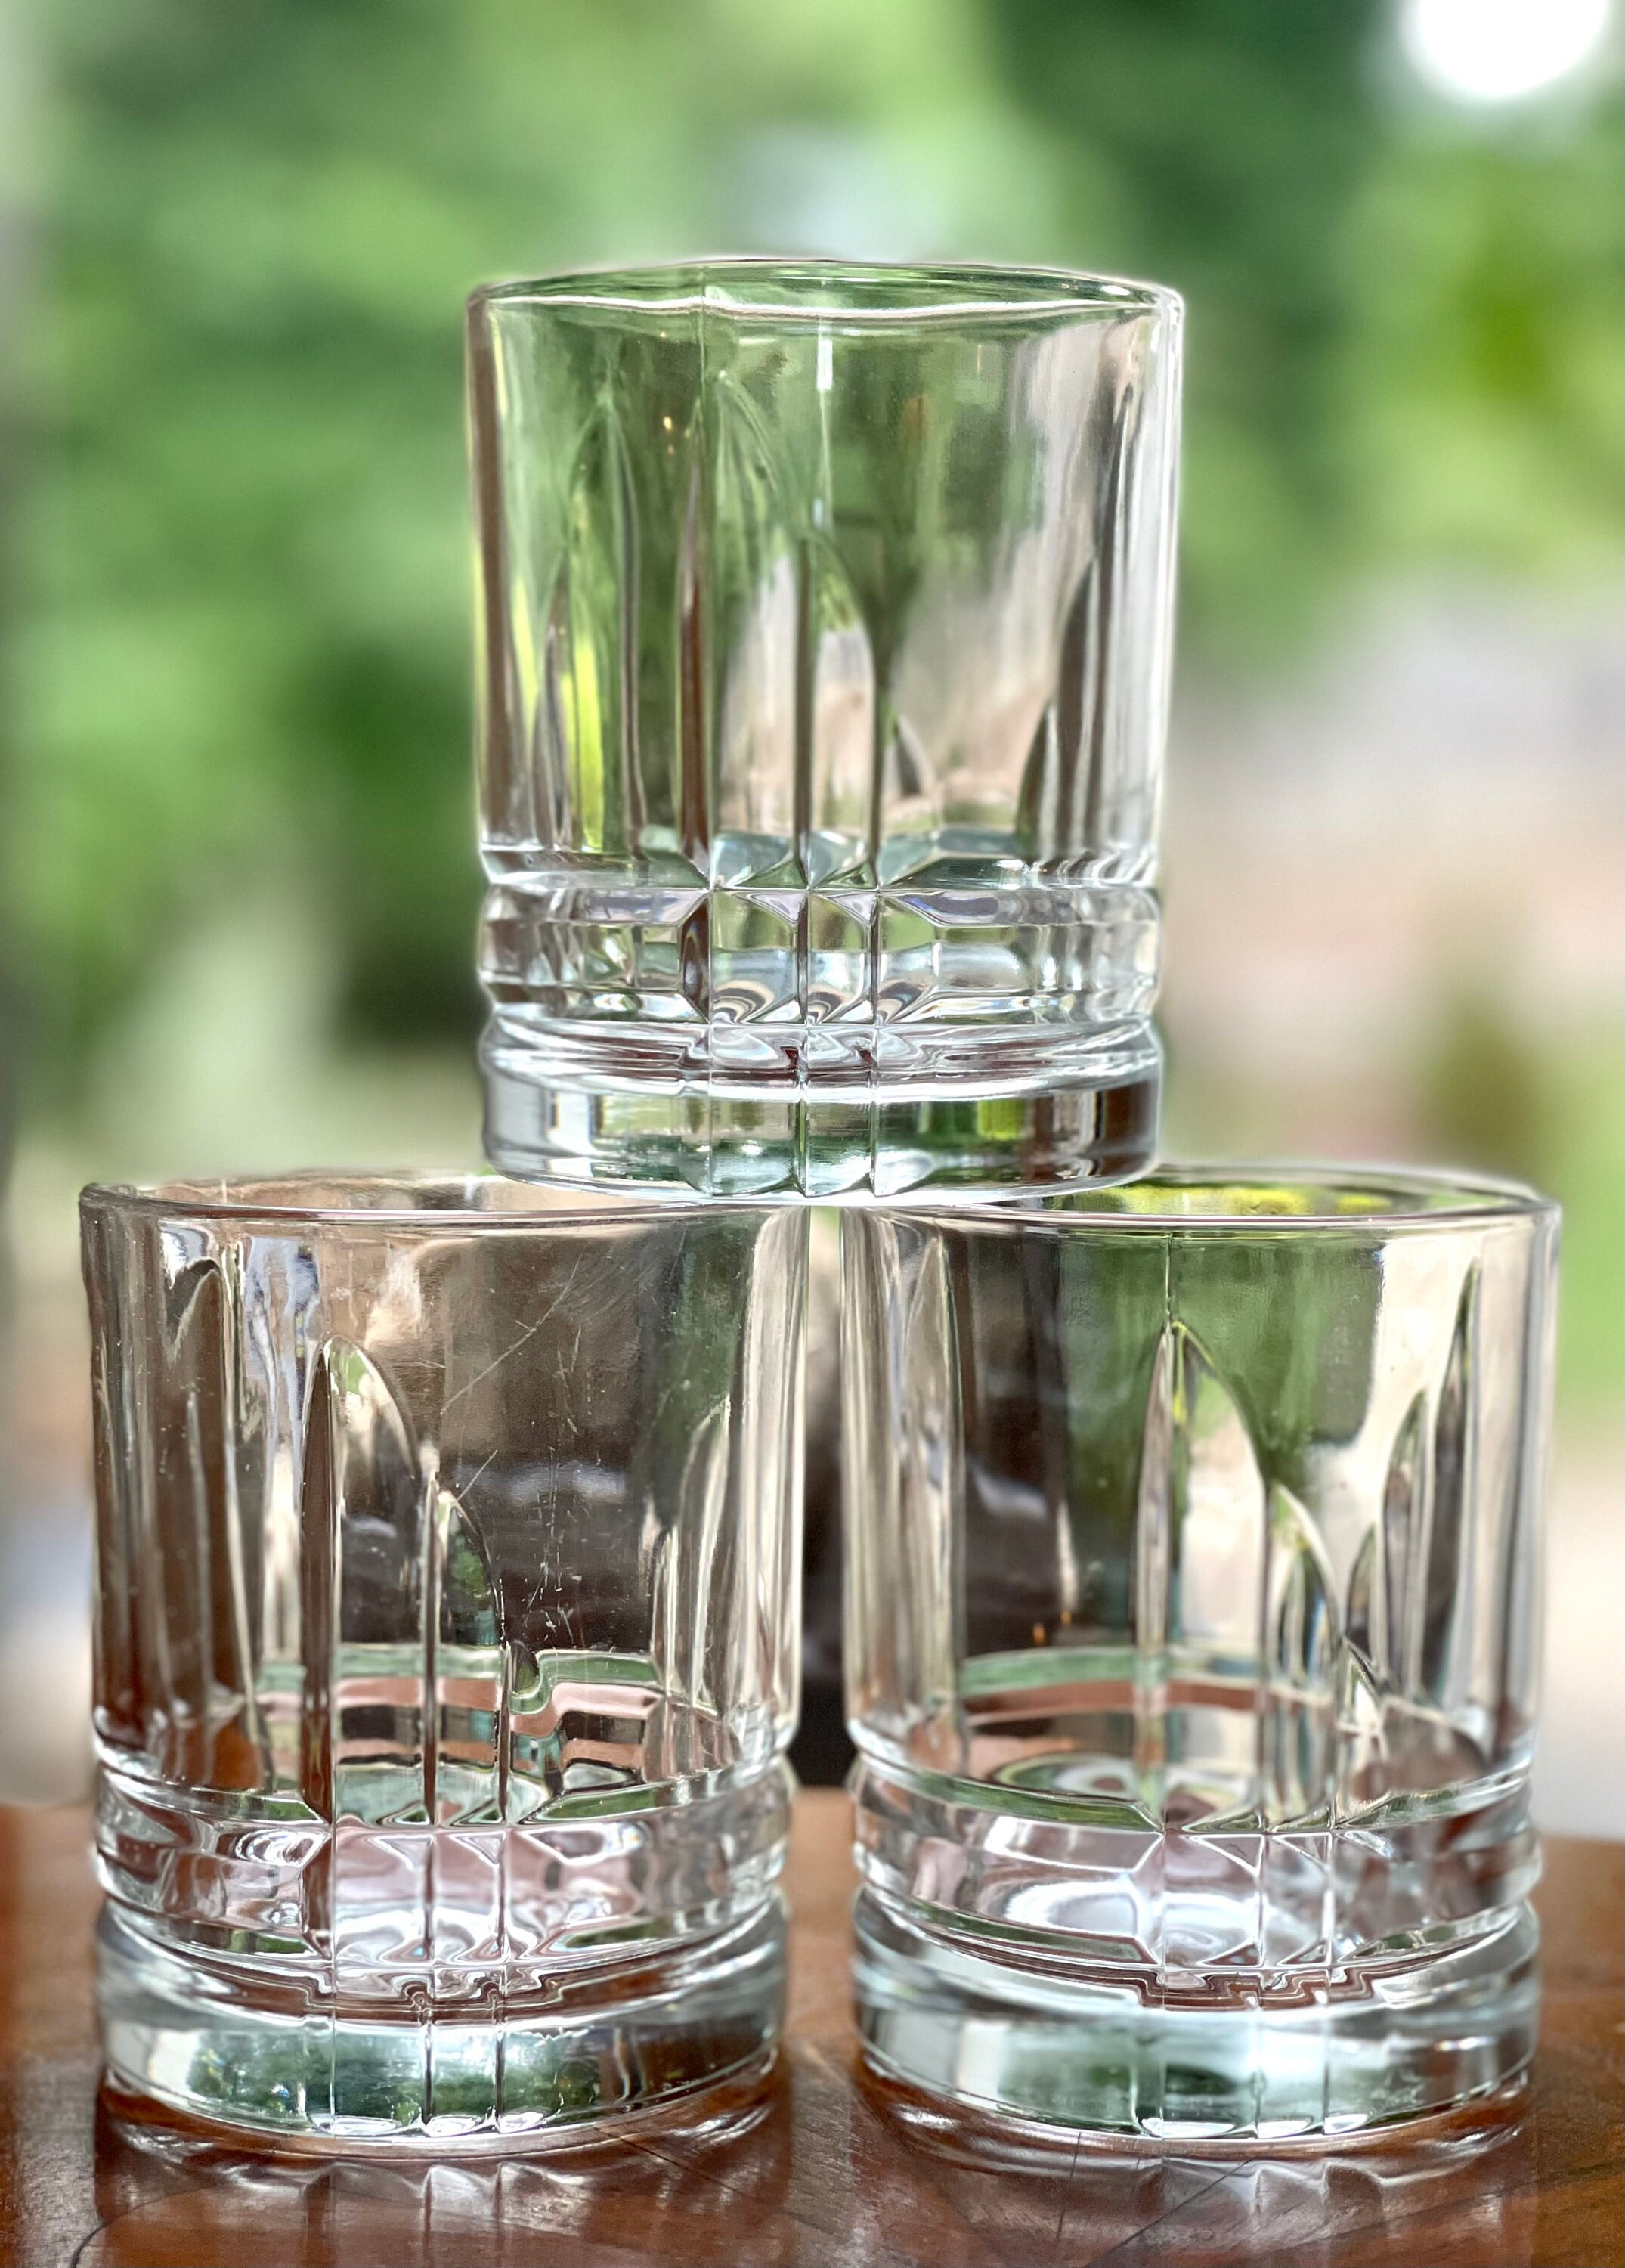 Set/3 Cristal D’Arques-Durand Arizona Parallels double old fashioned  glasses/whiskey glasses/rocks glass groomsmen's gift housewarming gift